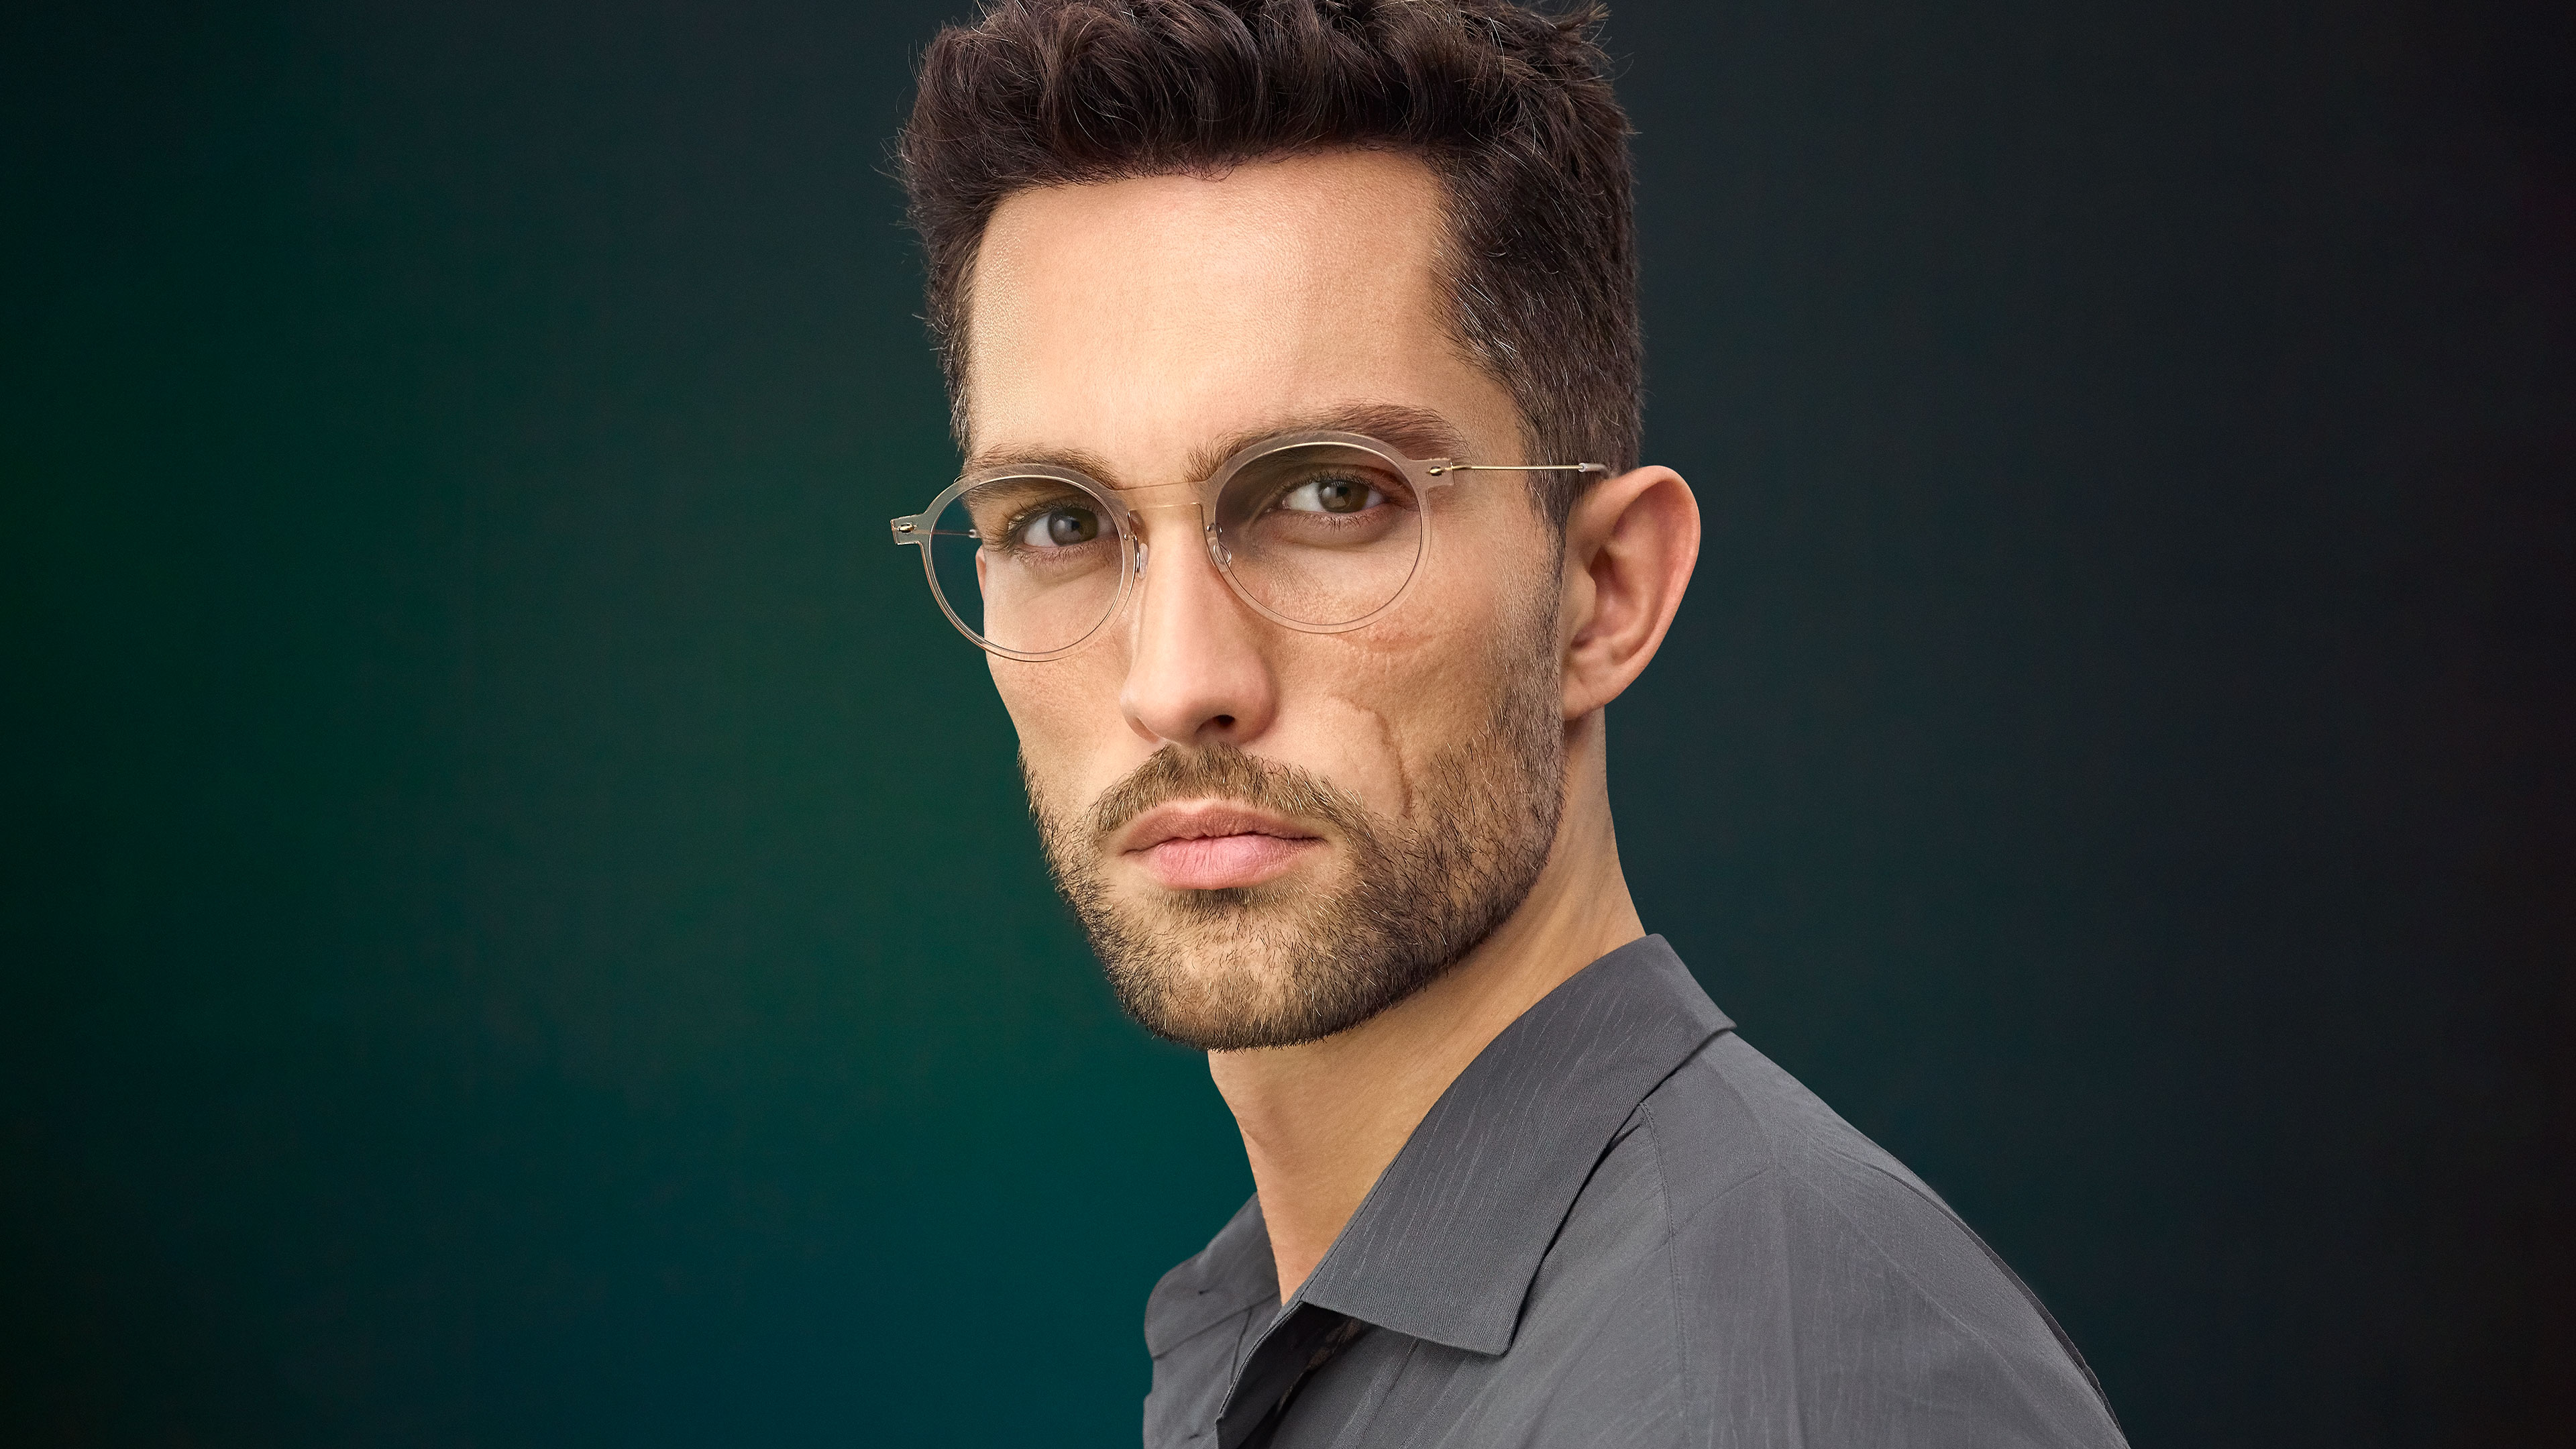 Men’s LINDBERG now titanium Model 6586 clear glasses in a round panto shape with GT gold tone temples